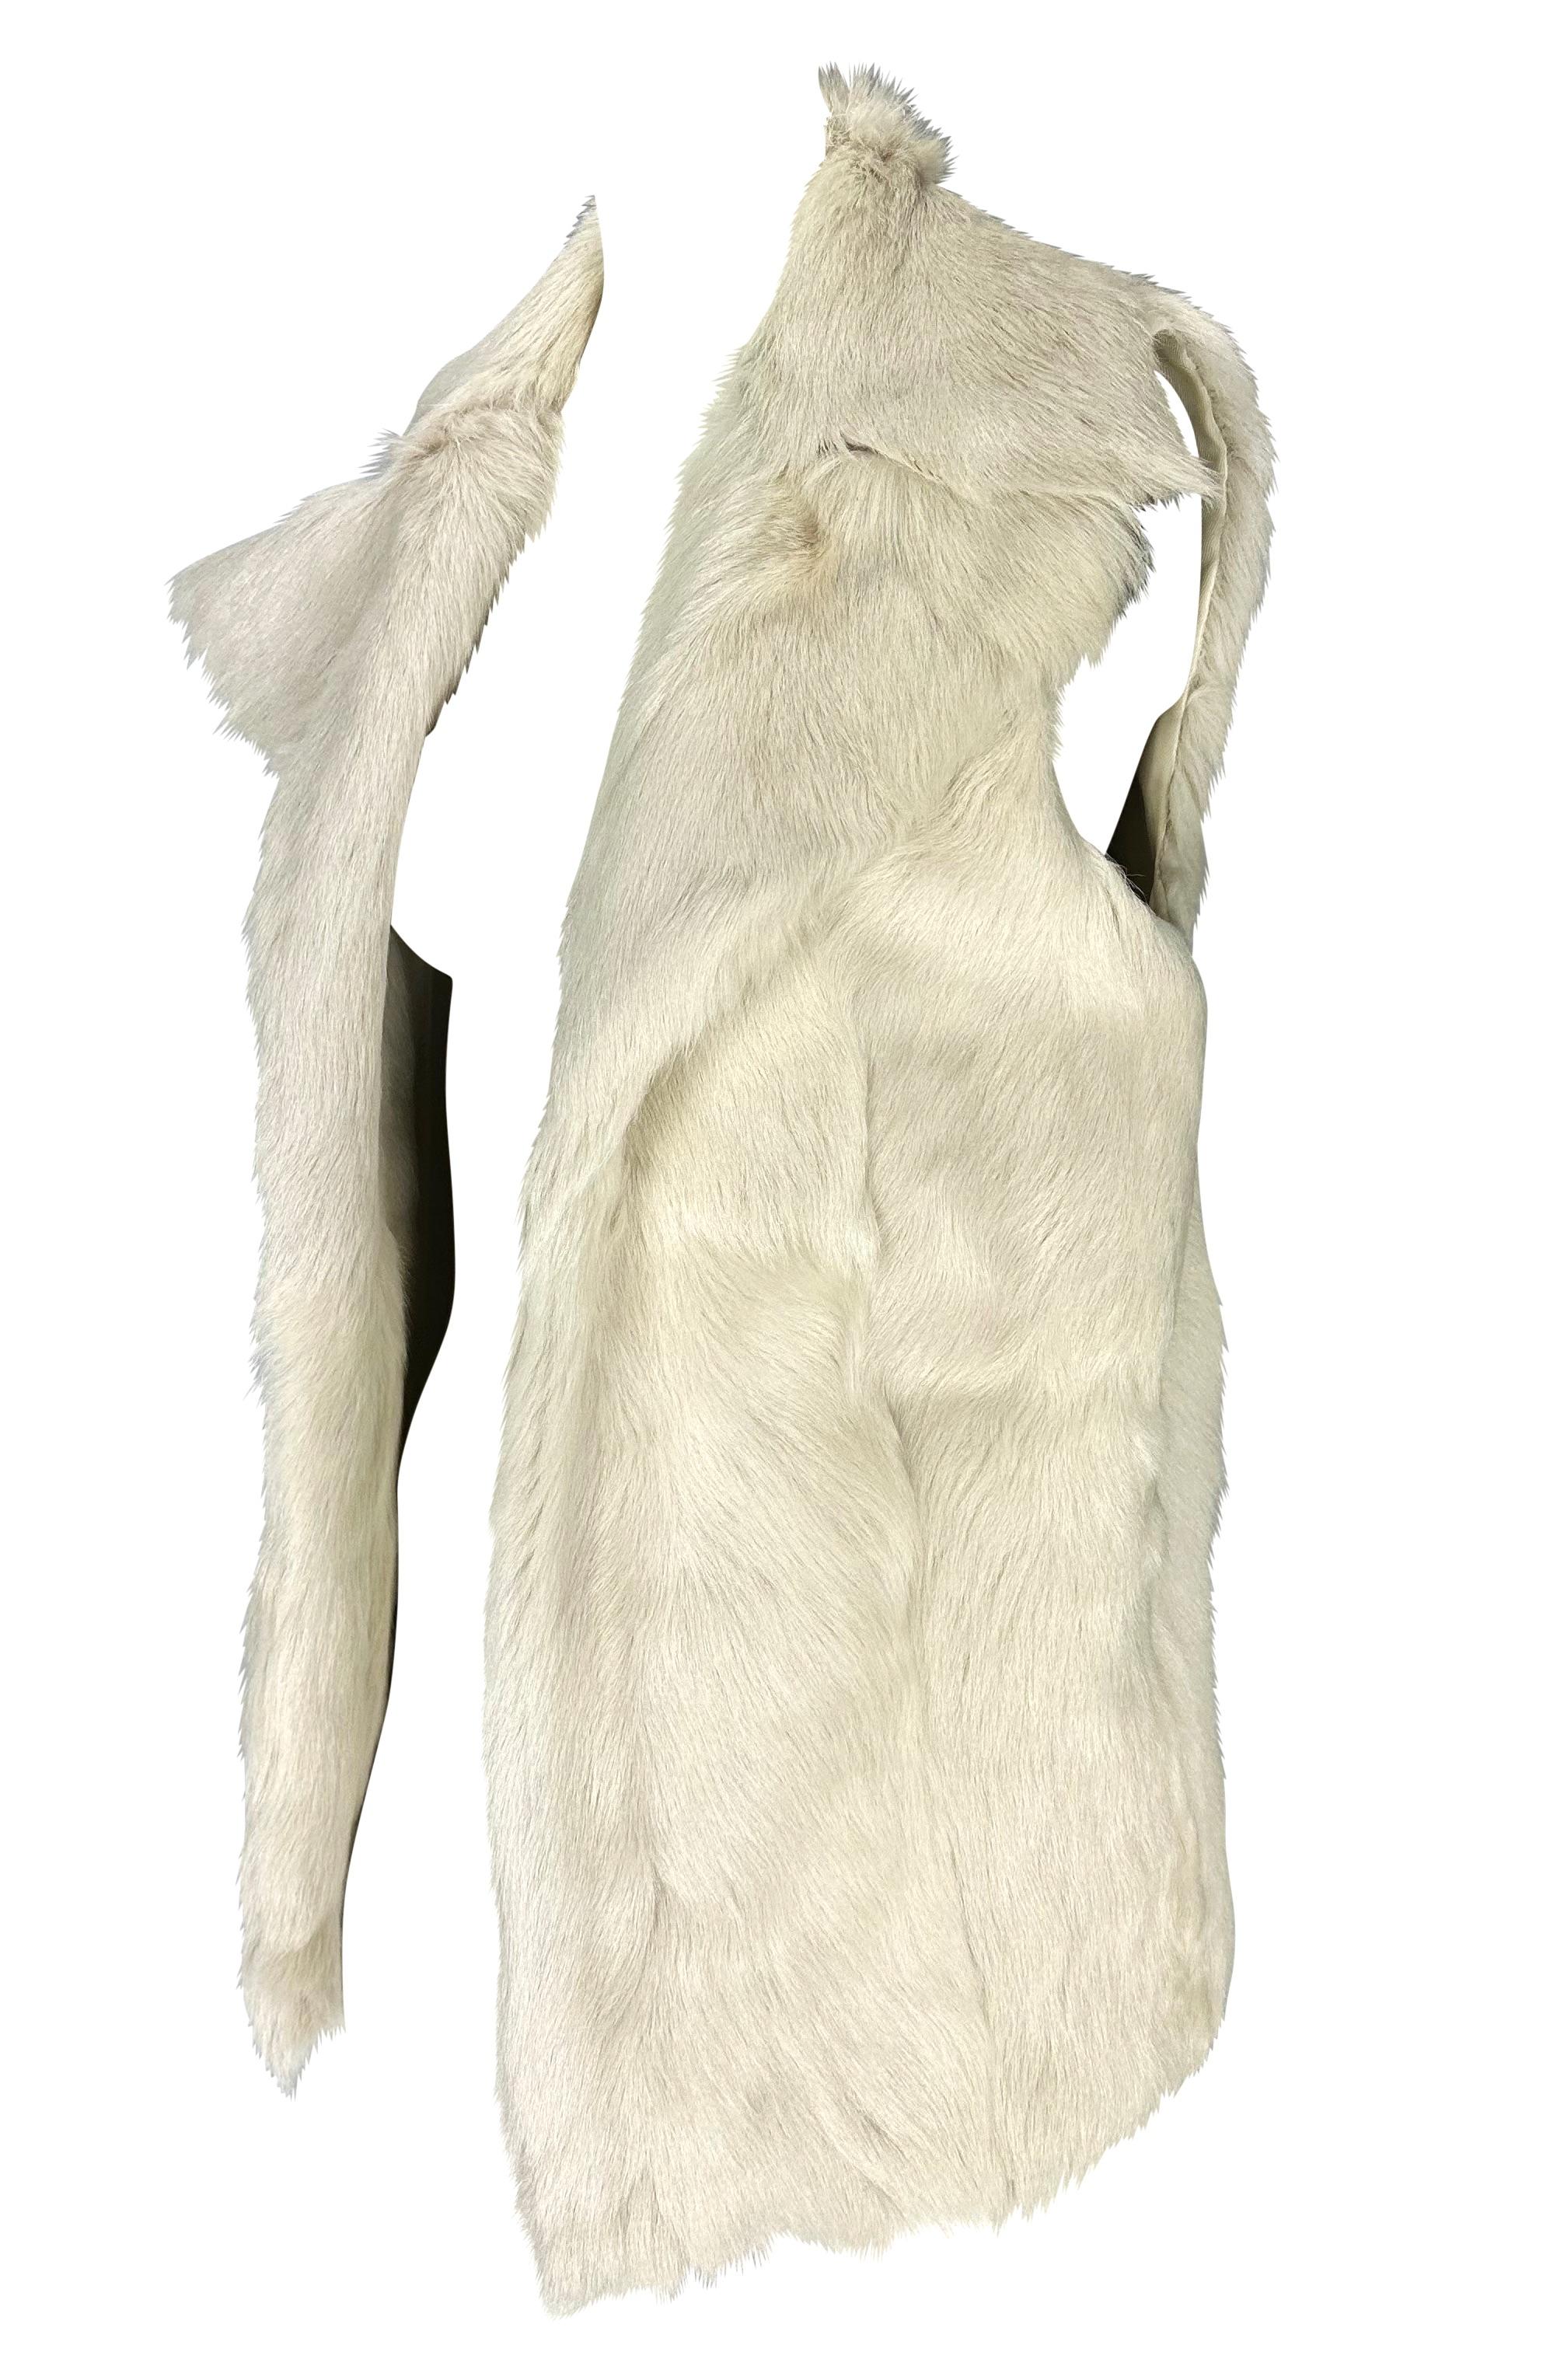 TheRealList presents: an incredible unisex/men's off-white goat fur Gucci vest, designed by Tom Ford. From the Fall/Winter 1999 collection, this rare sample piece never made it to production. The vest is constructed entirely of goat fur and features